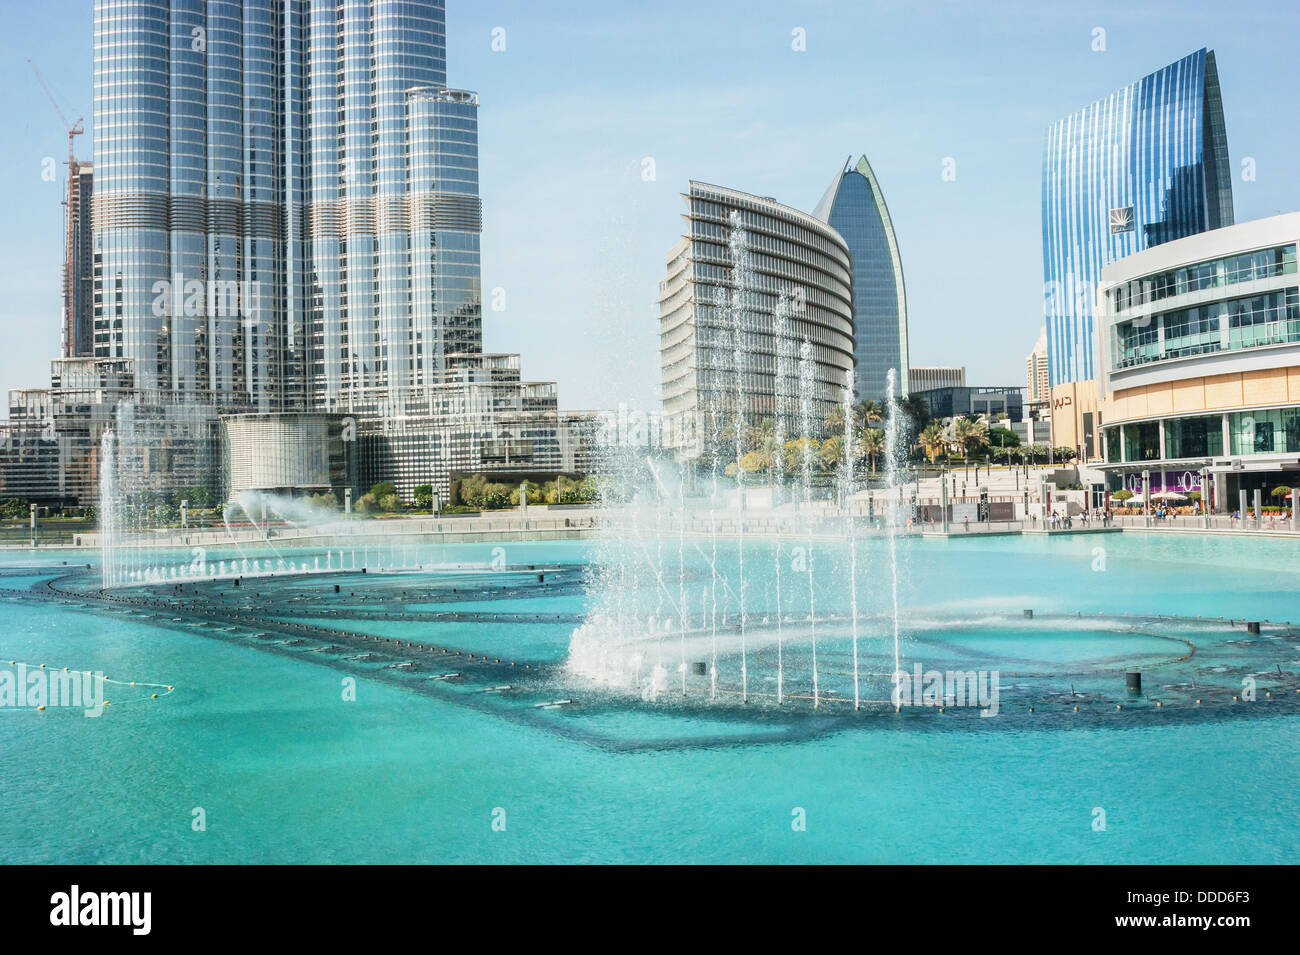 Dancing fountains downtown and in a man-made lake in Dubai Stock Photo